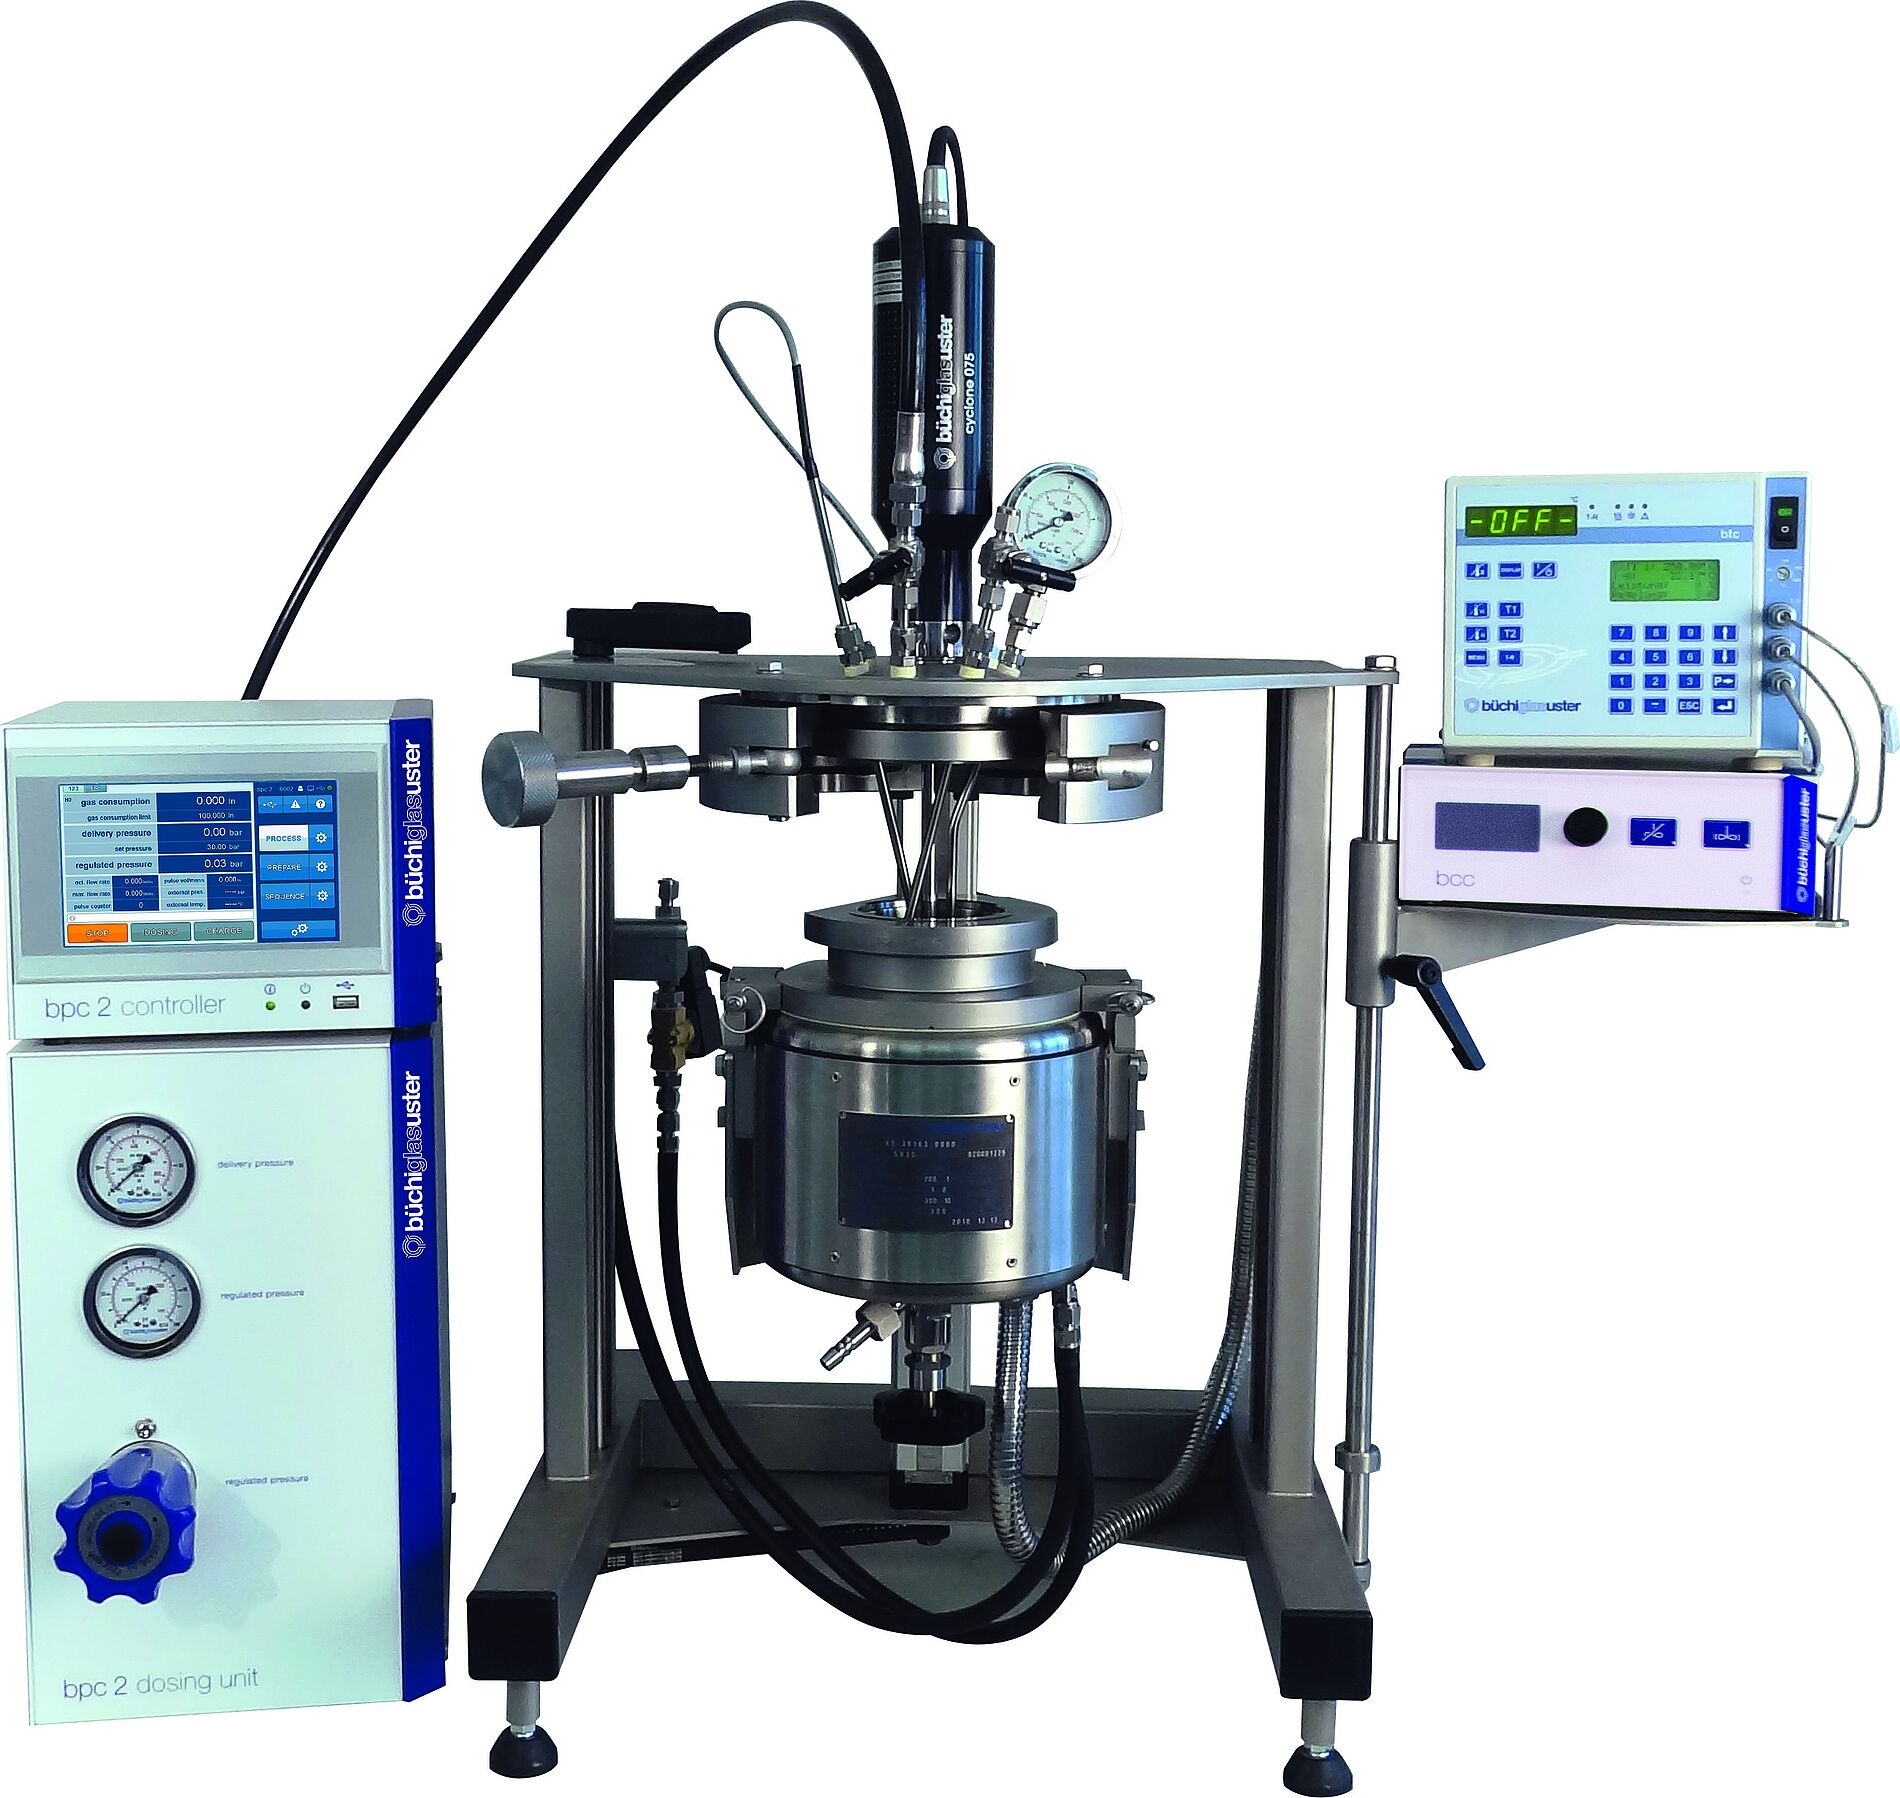 bpc 2 Hydrogenation system with midiclave pressure reactor